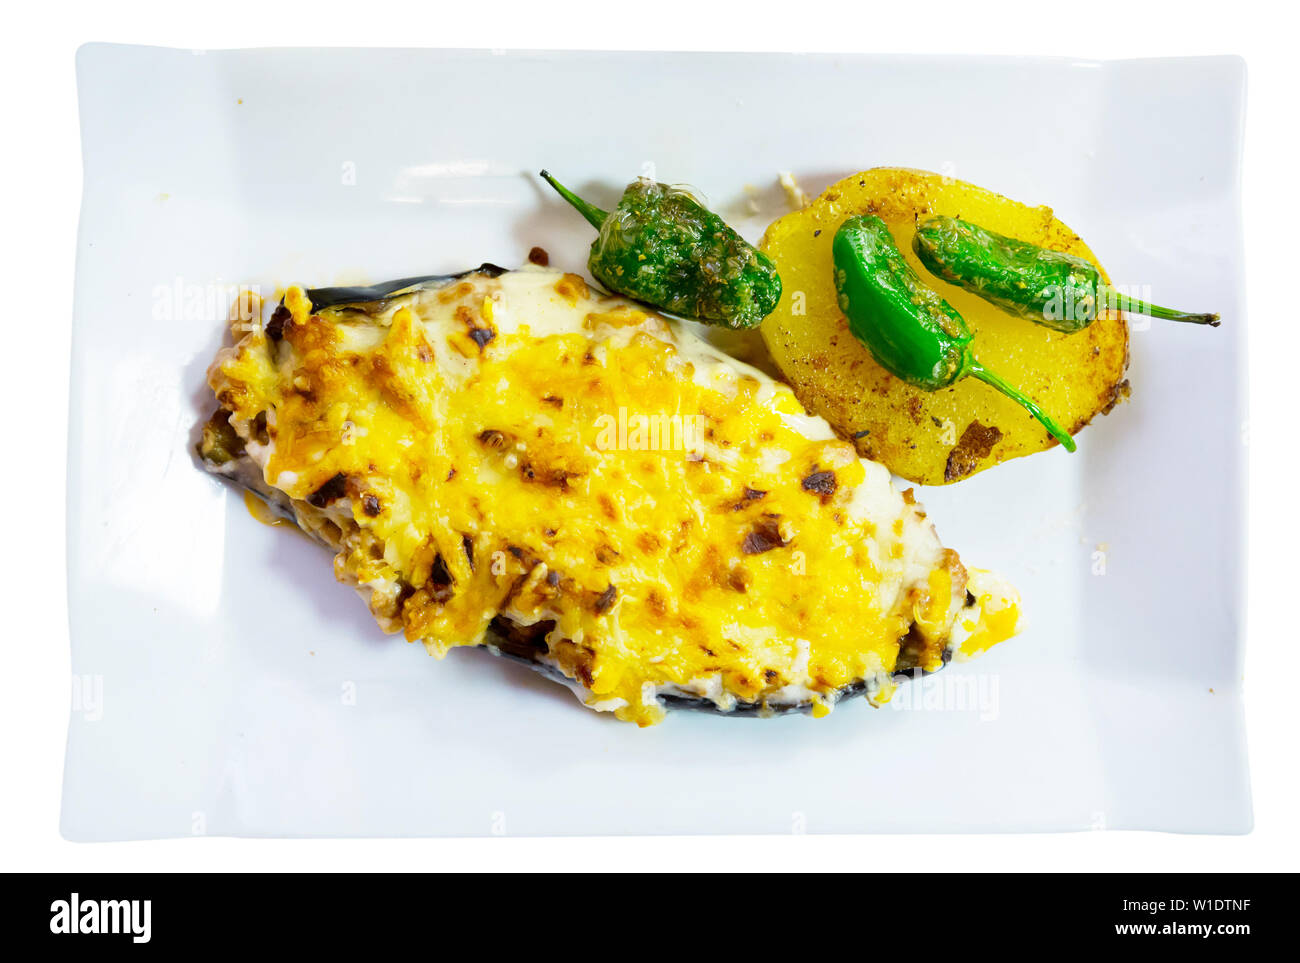 Stuffed with meat tasty eggplant baked with bechamel sauce and cheese. Isolated over white background Stock Photo